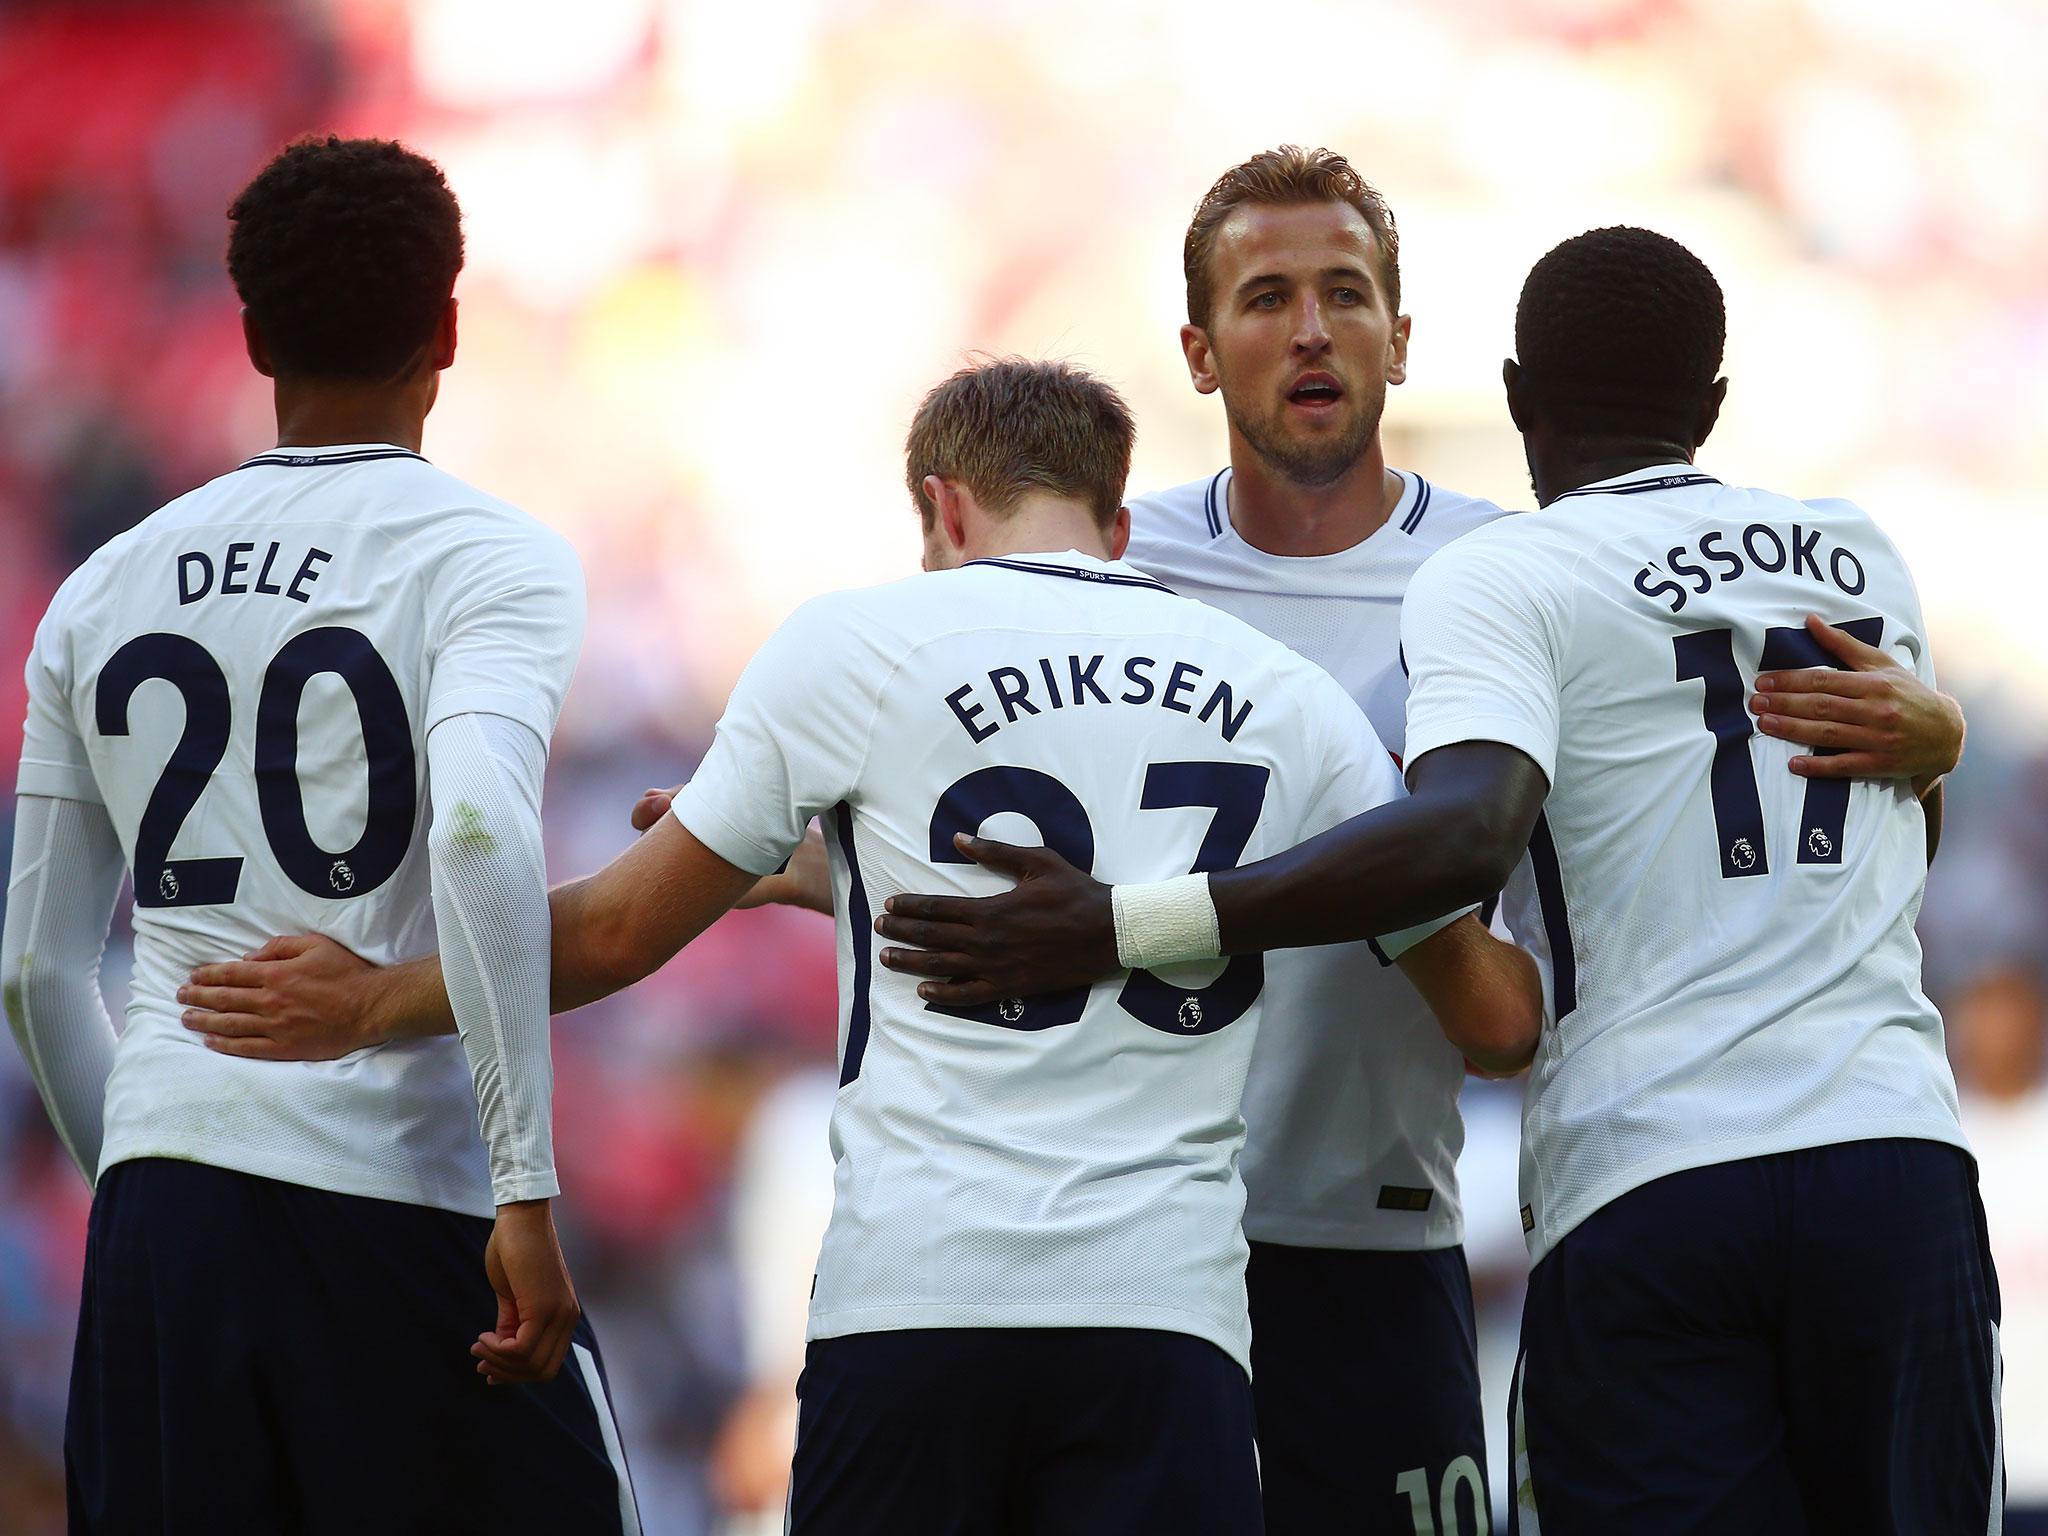 Tottenham will be pushing for the title once again this season